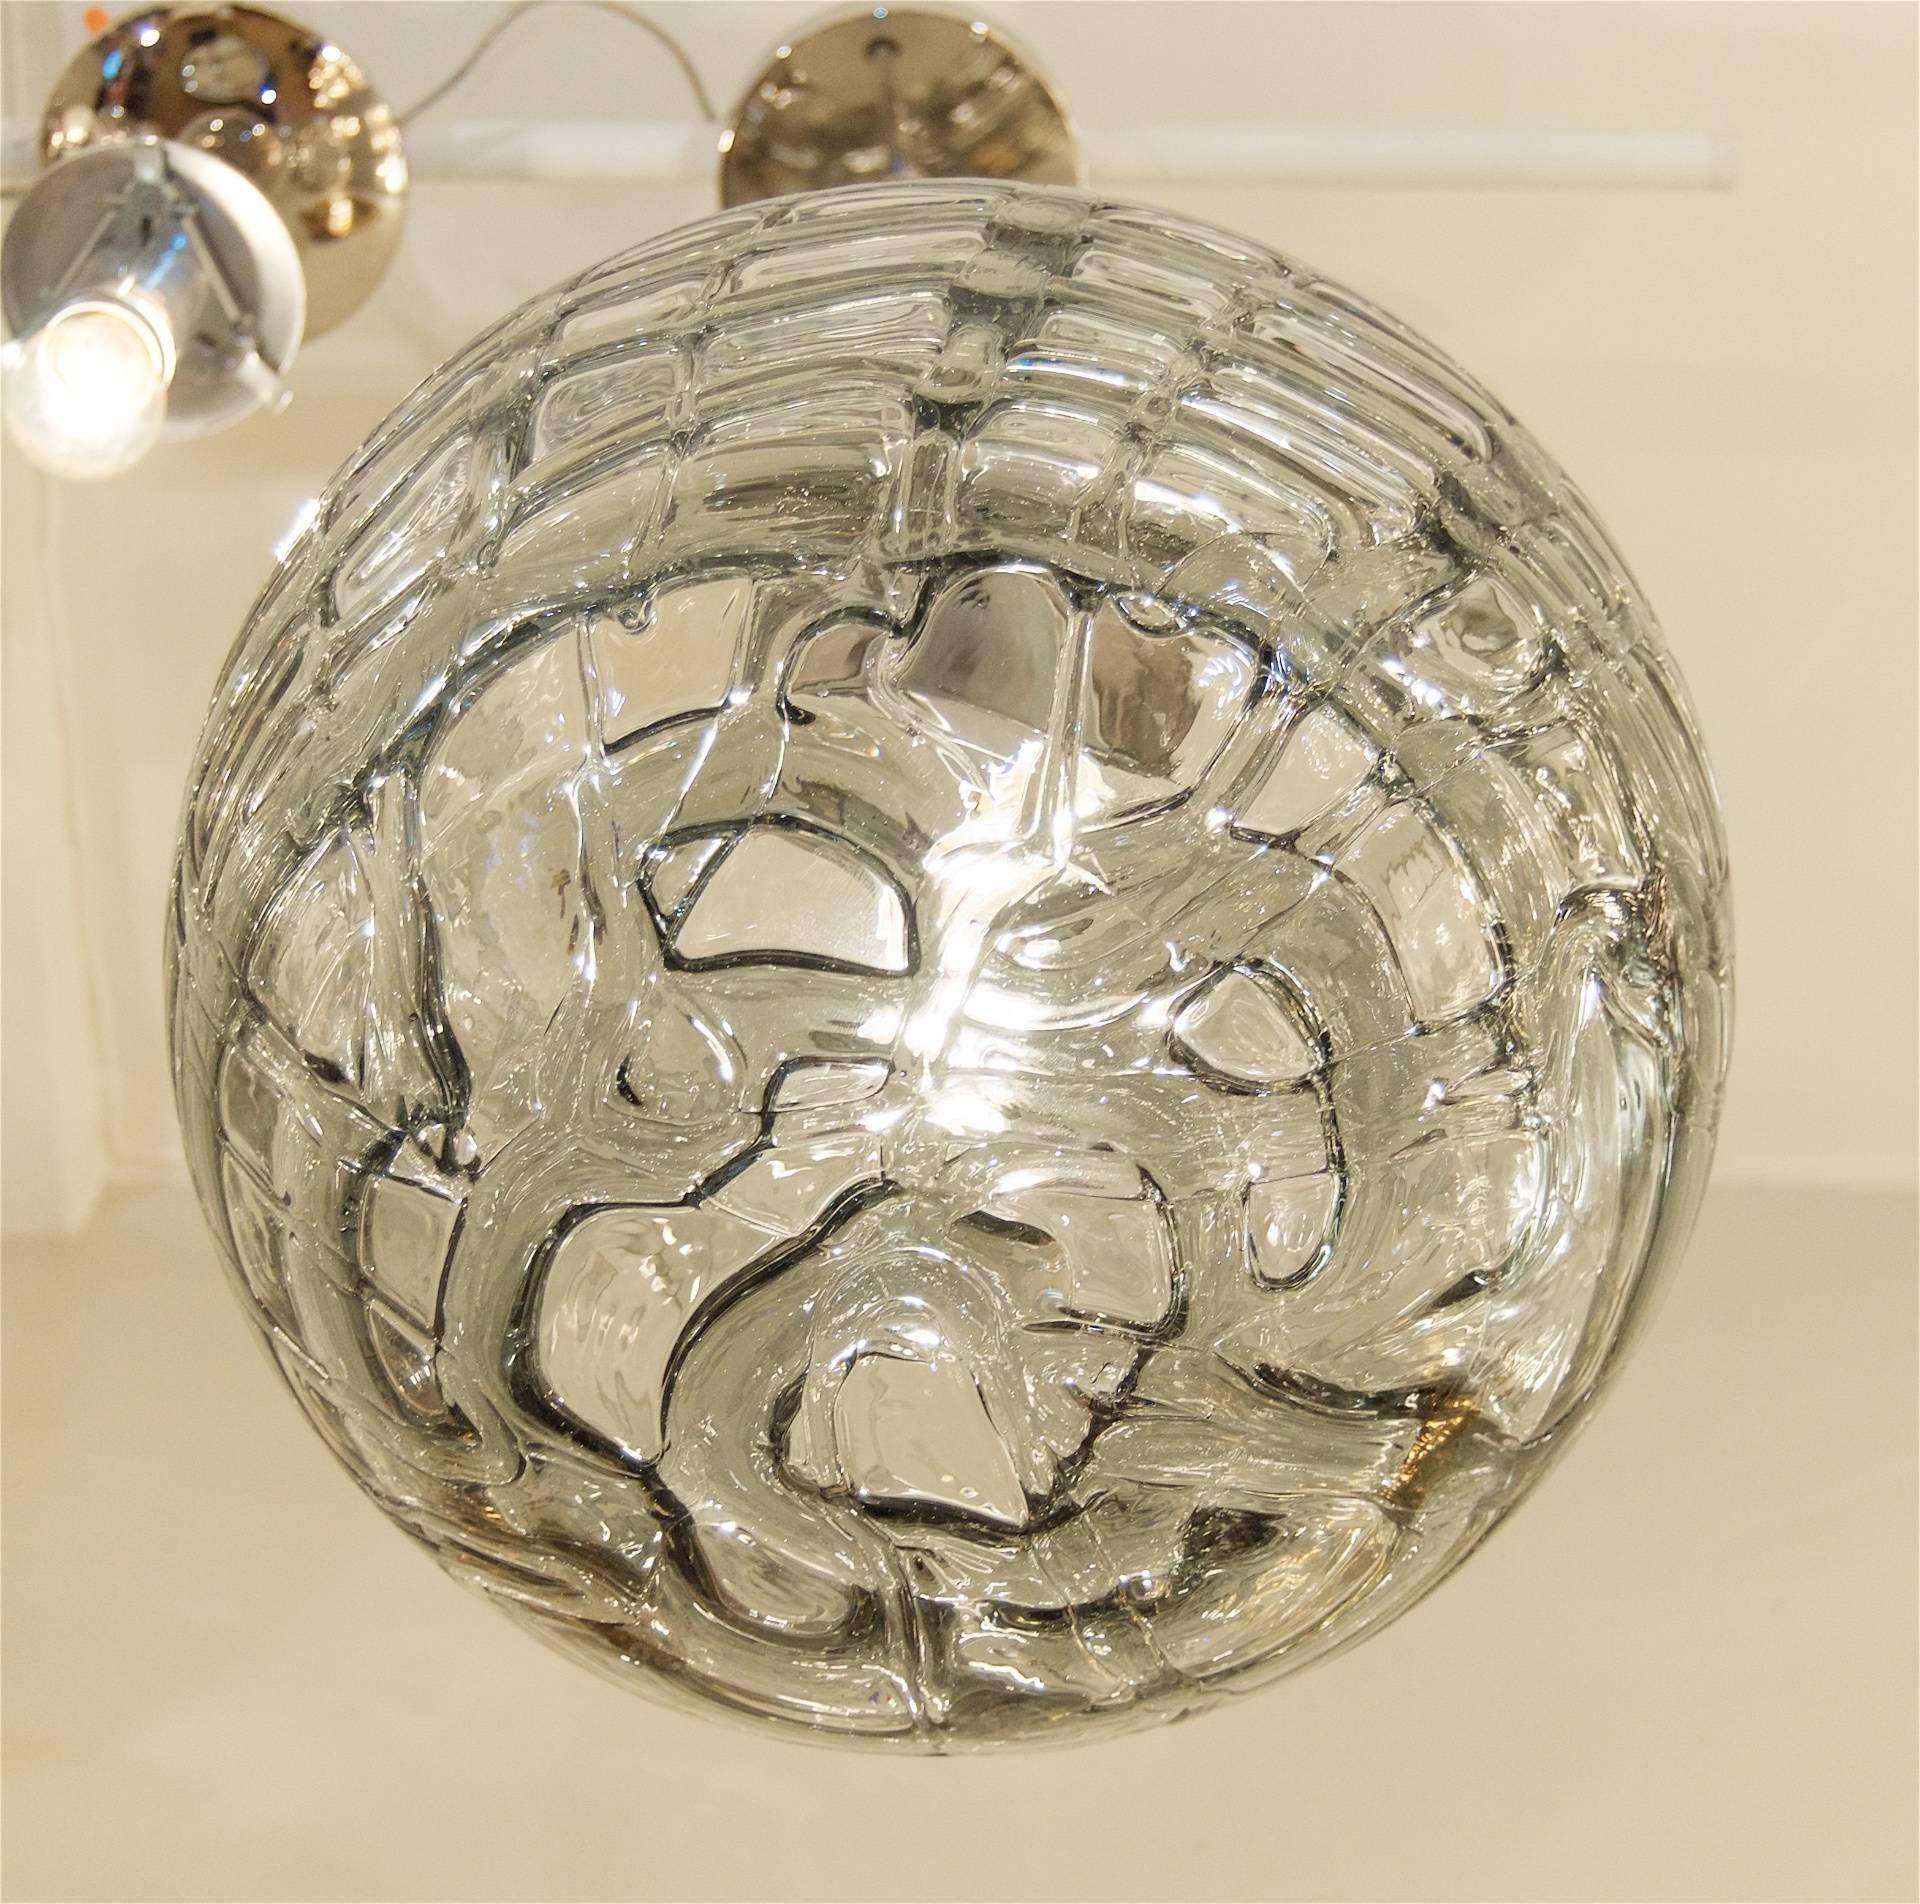 Massive Doria Organic Patterned Smoke Toned Glass Globe In Excellent Condition For Sale In Stamford, CT